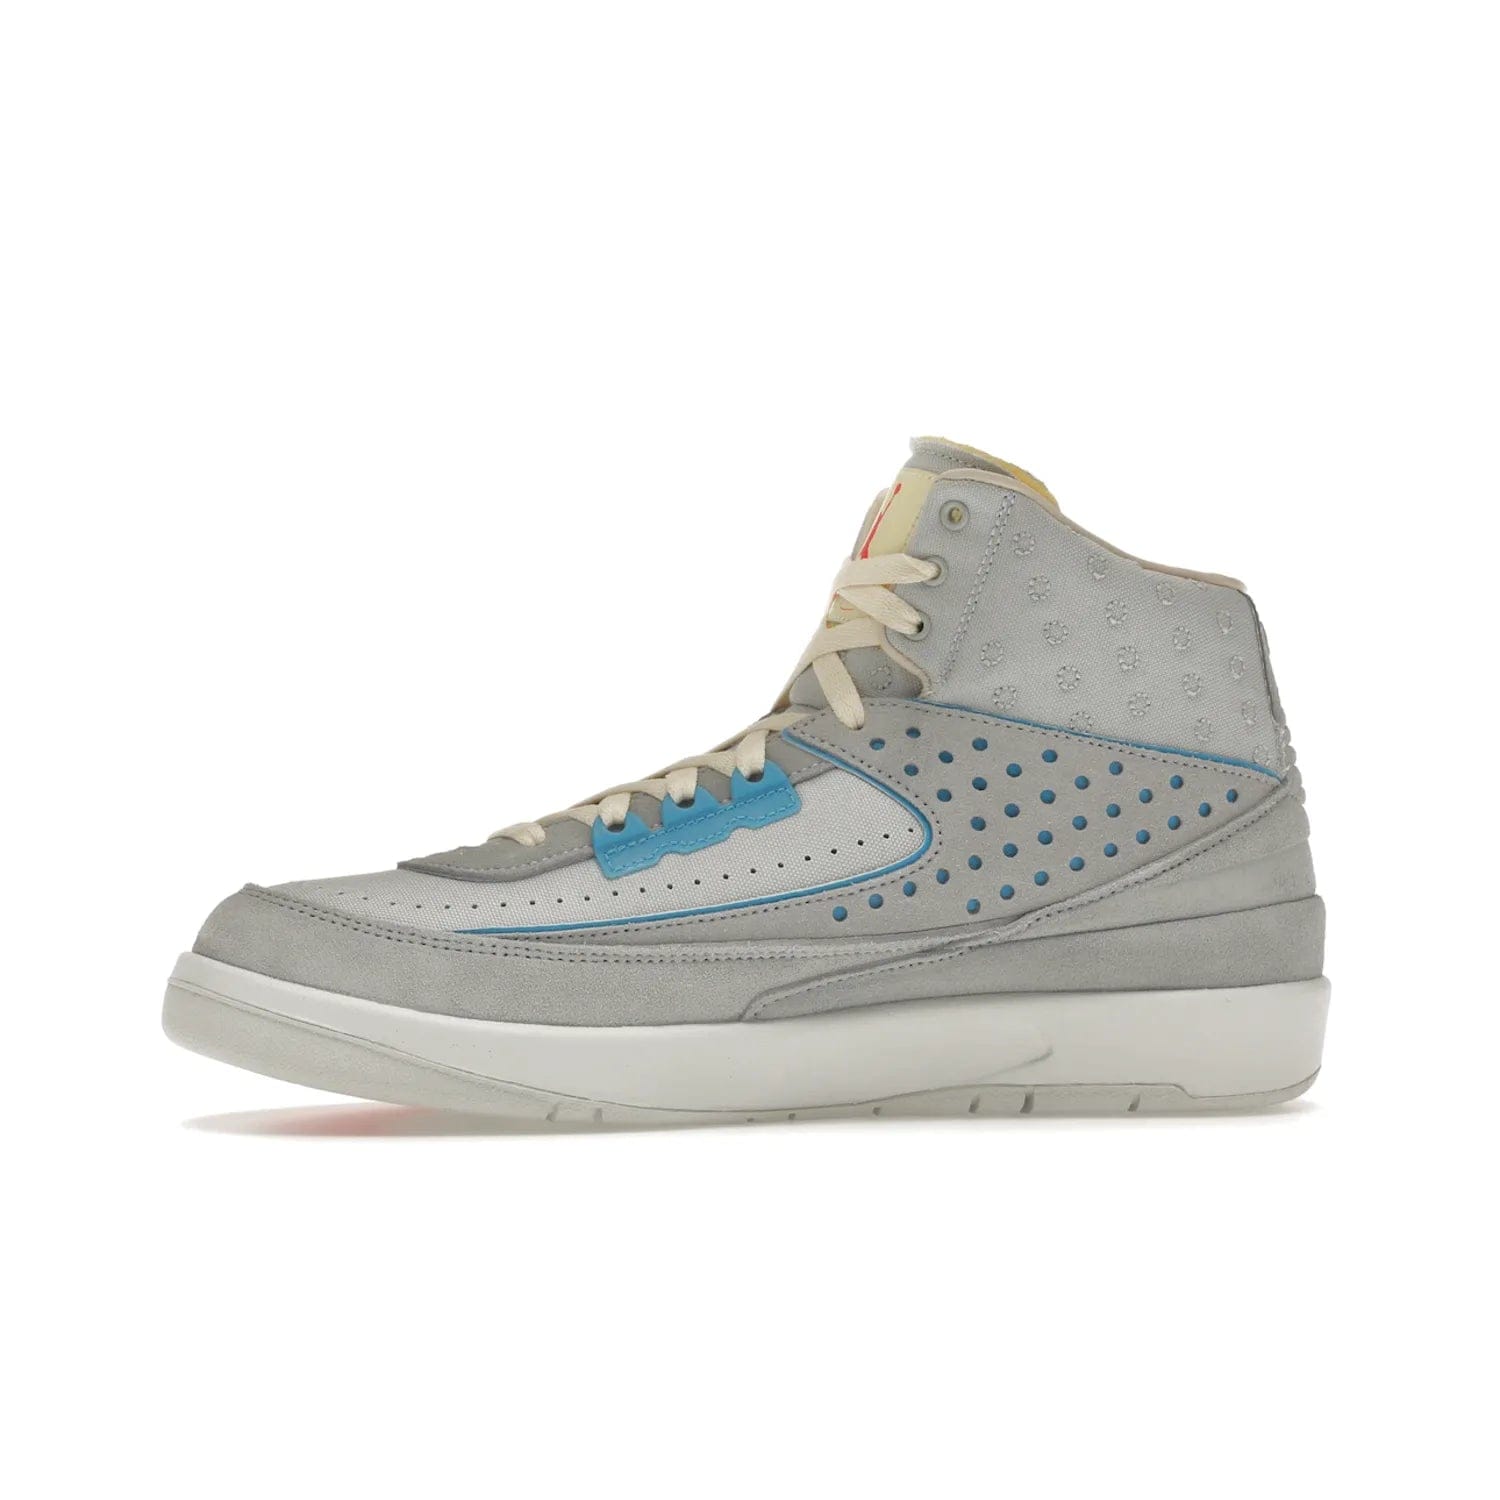 Jordan 2 Retro SP Union Grey Fog - Image 18 - Only at www.BallersClubKickz.com - Introducing the Air Jordan 2 Retro SP Union Grey Fog. This intricate sneaker design features a grey canvas upper with light blue eyelets, eyestay patches, and piping, plus custom external tags. Dropping in April 2022, this exclusive release offers a worn-in look and feel.